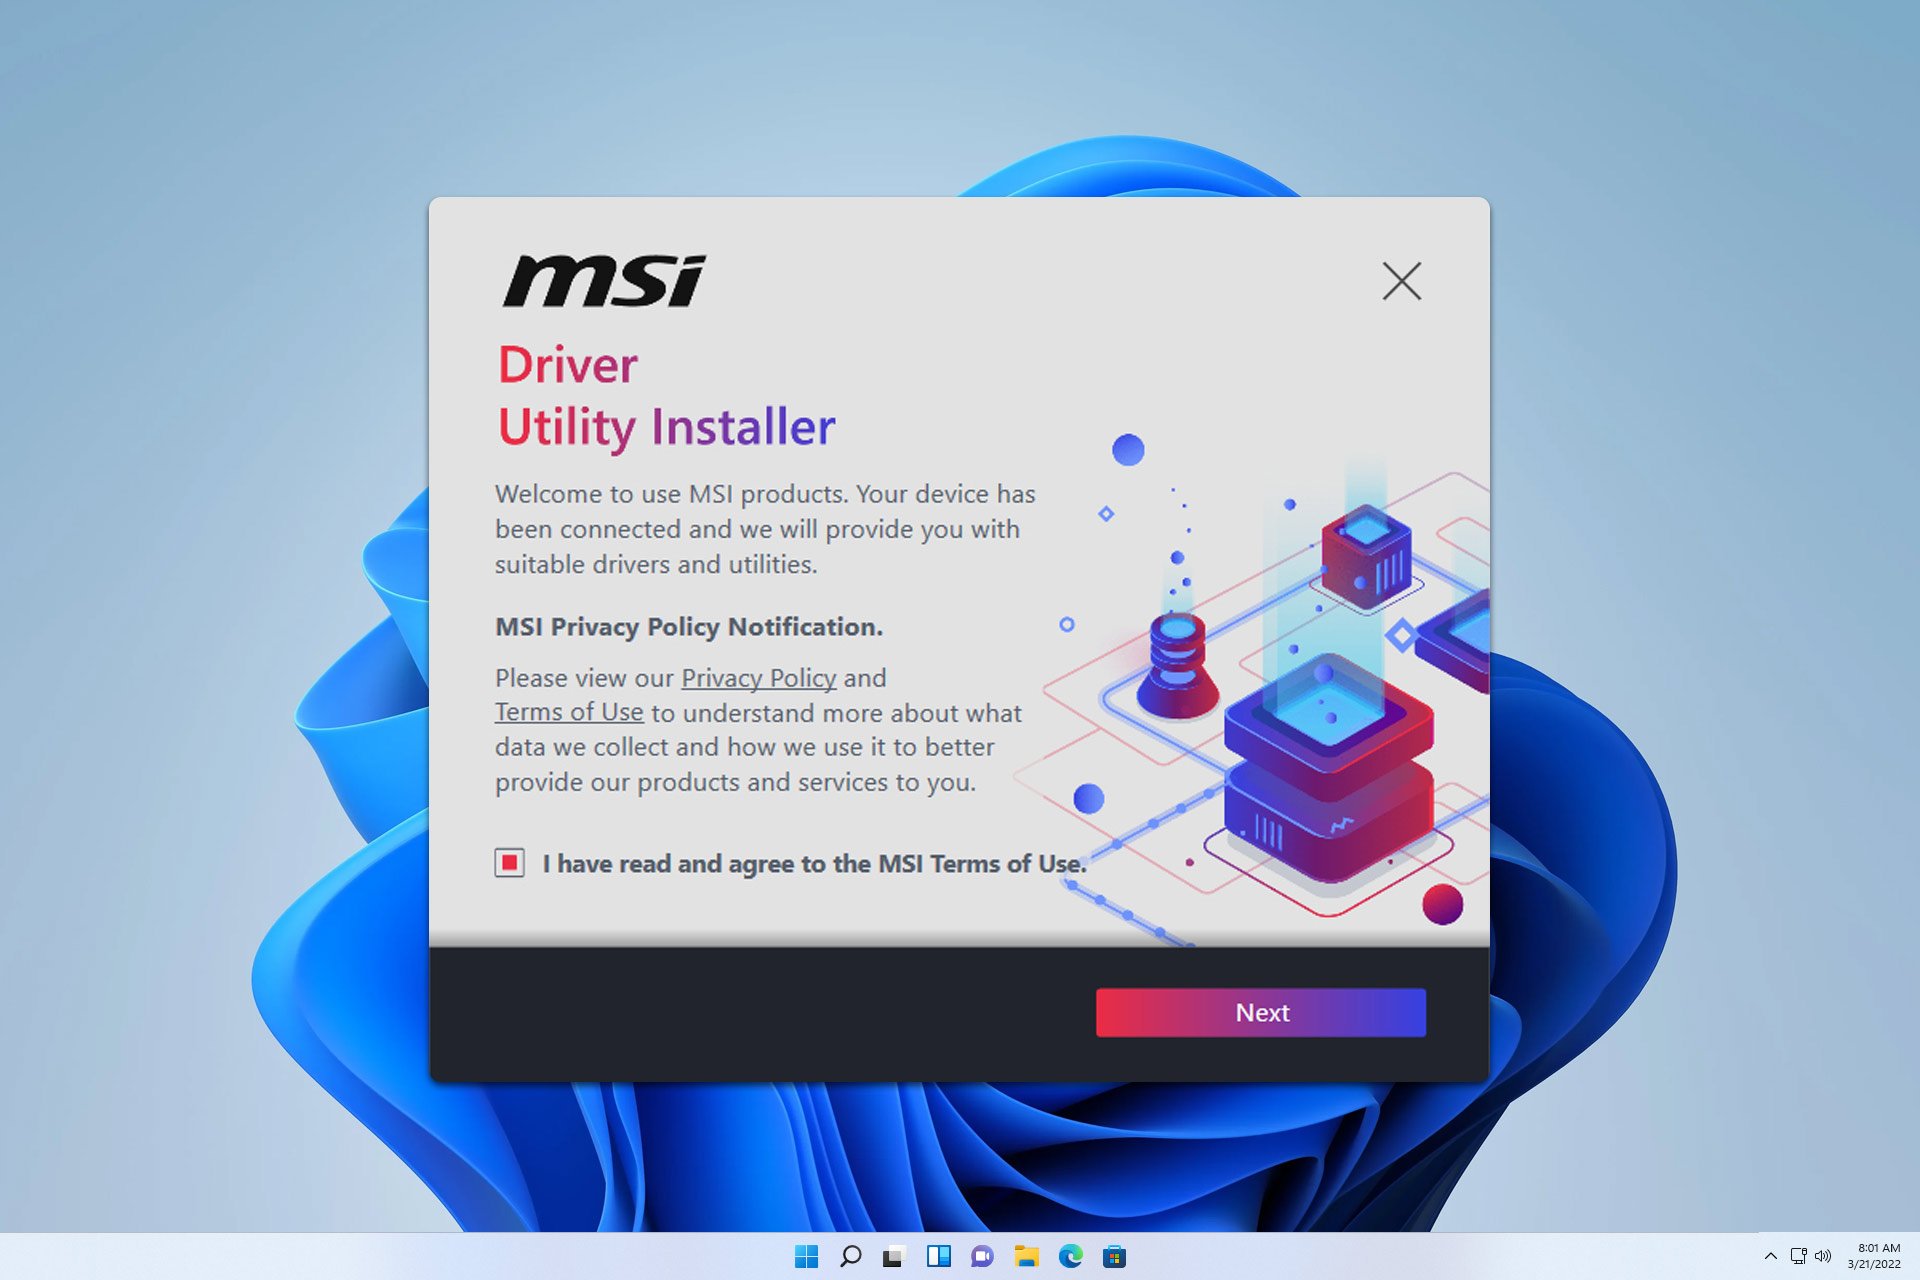 msi driver utility installer download